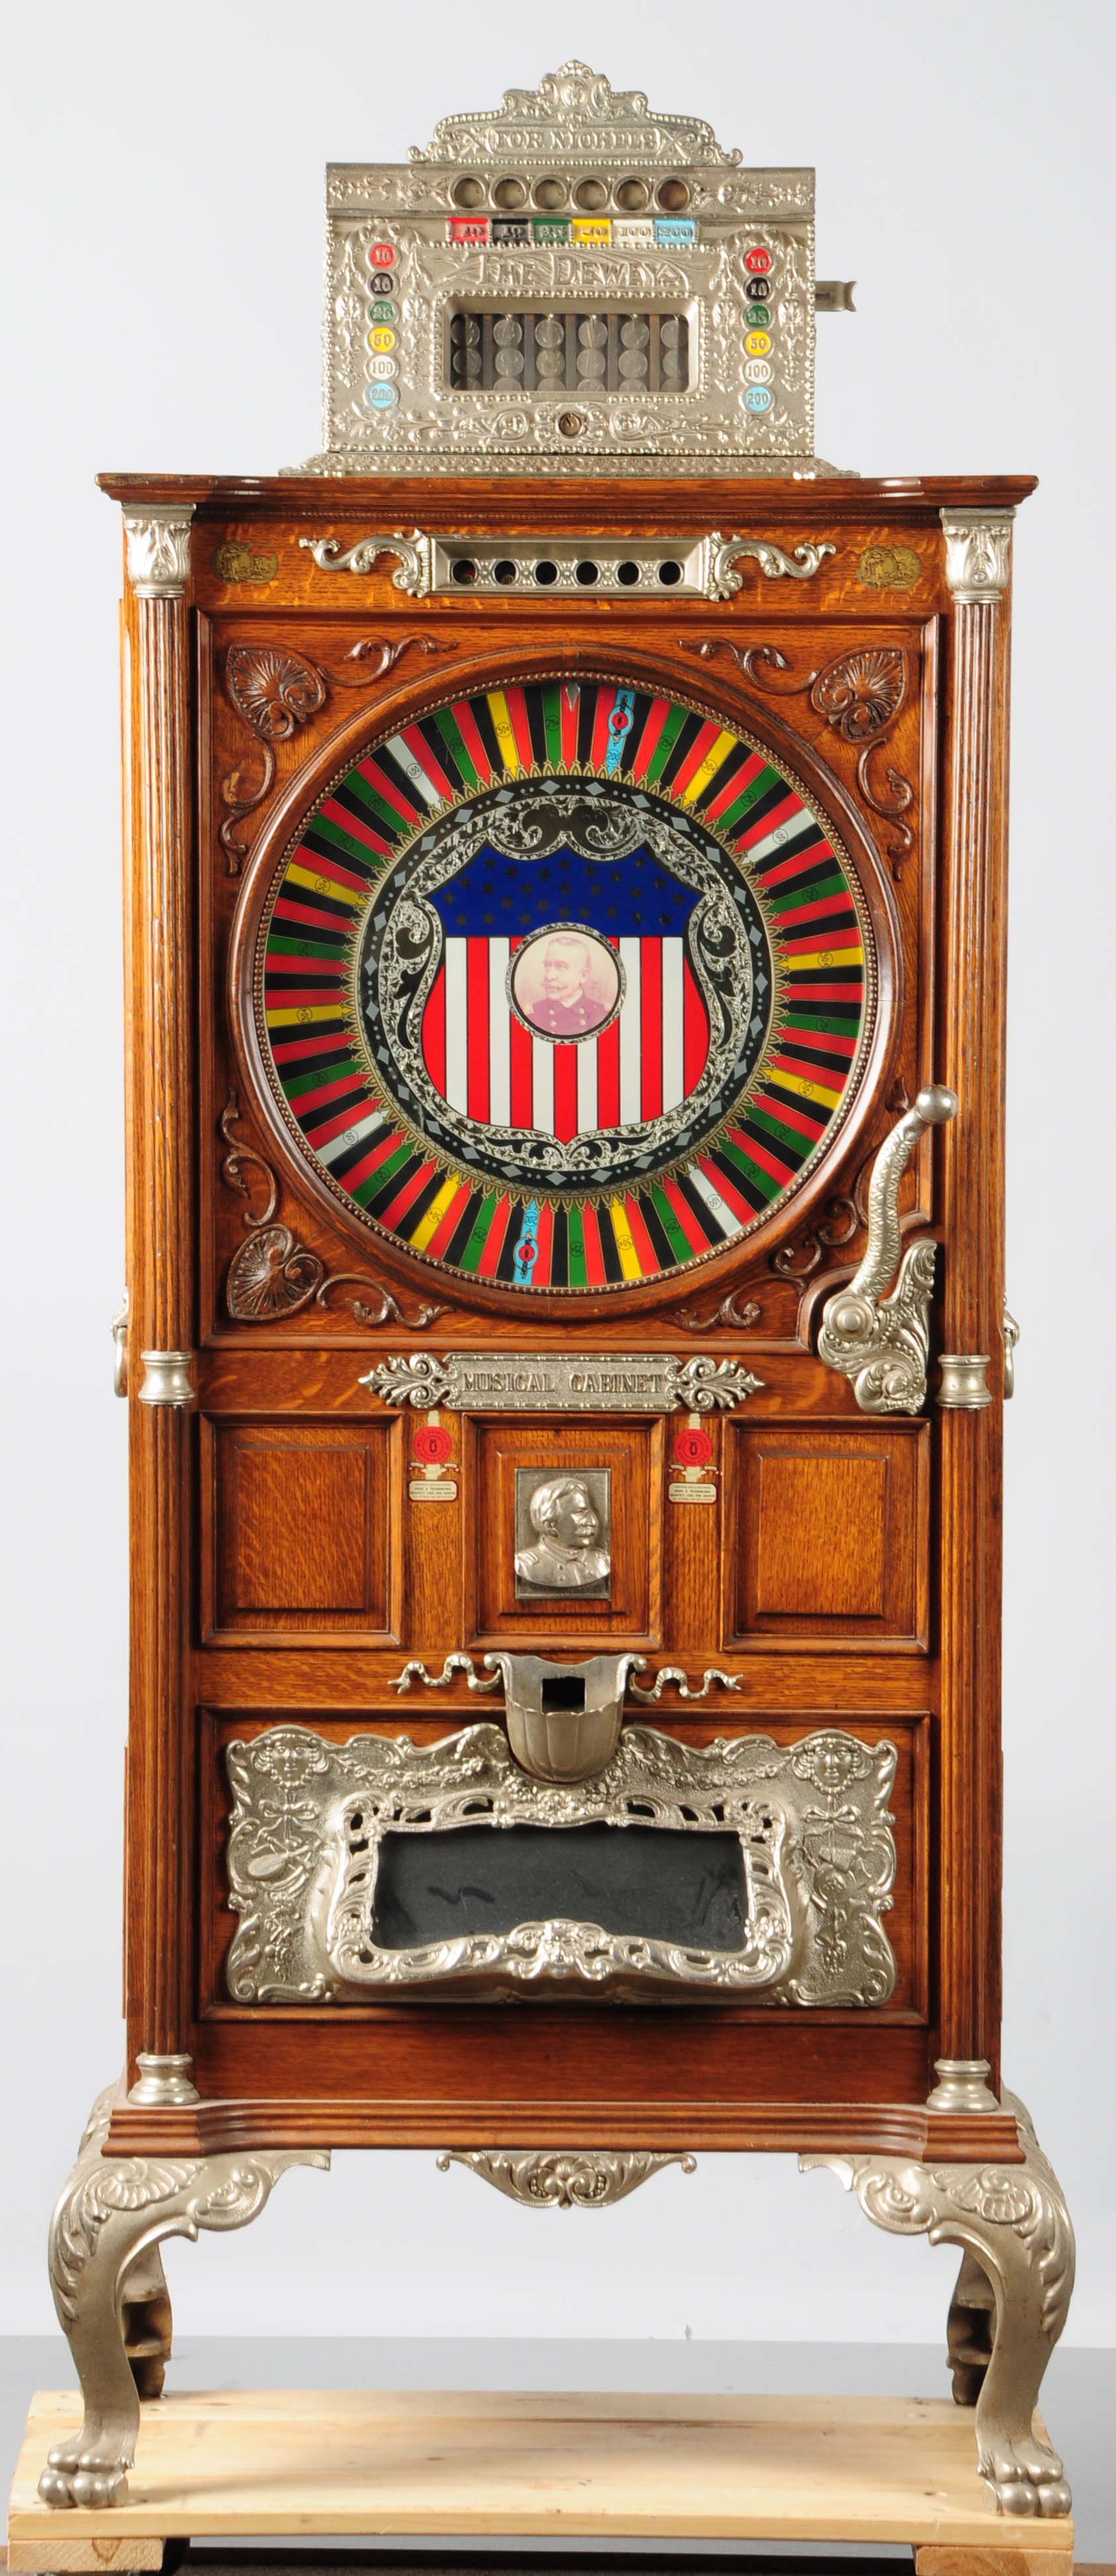 Mills 5-cent Dewey musical upright slot machine, working order with excellent repertoire of tunes. Est. $15,000-$18,000. Morphy Auctions image.